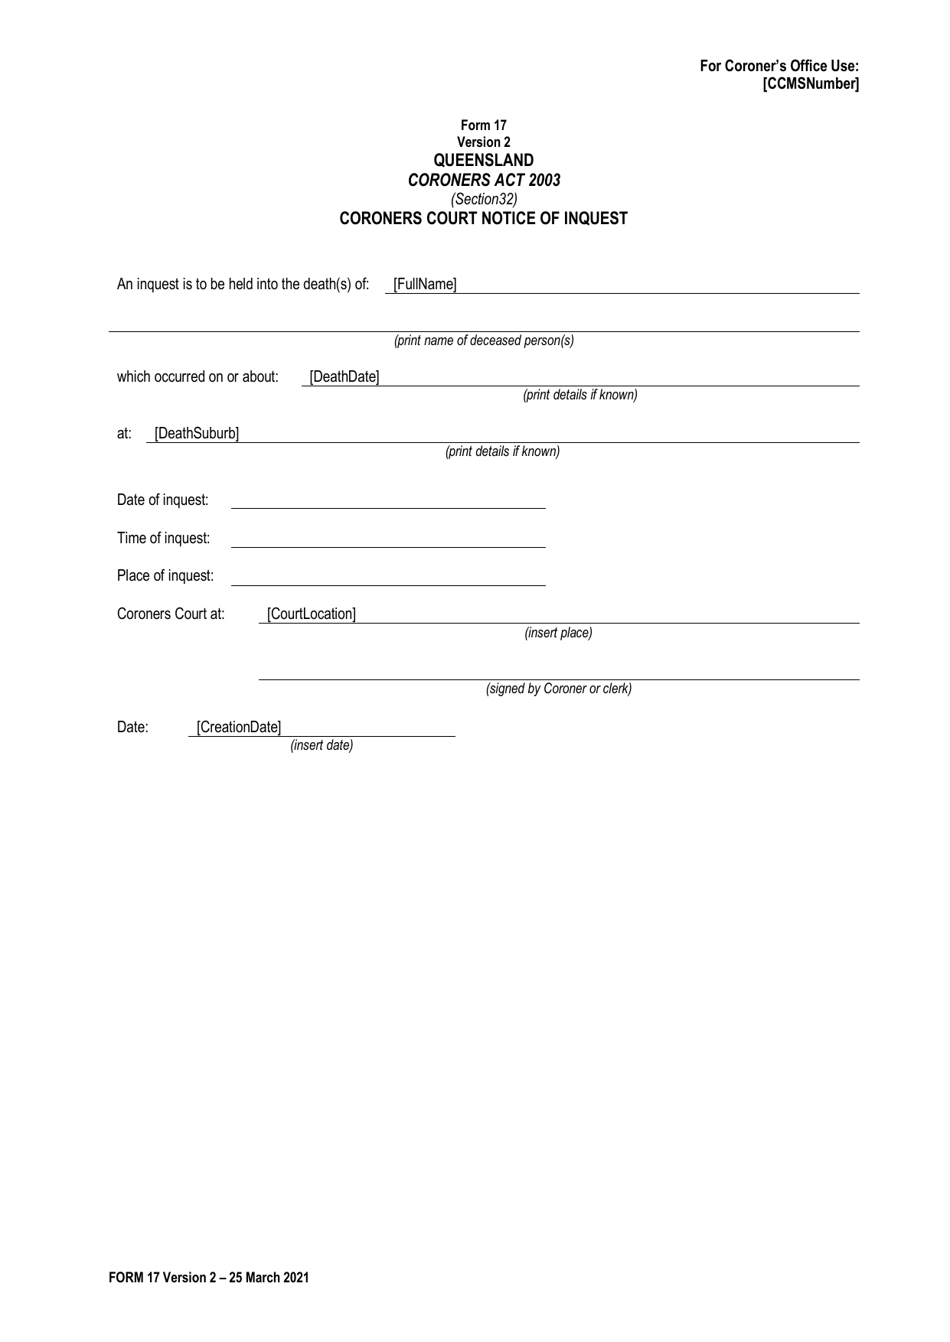 Form 17 Coroners Court Notice of Inquest - Queensland, Australia, Page 1